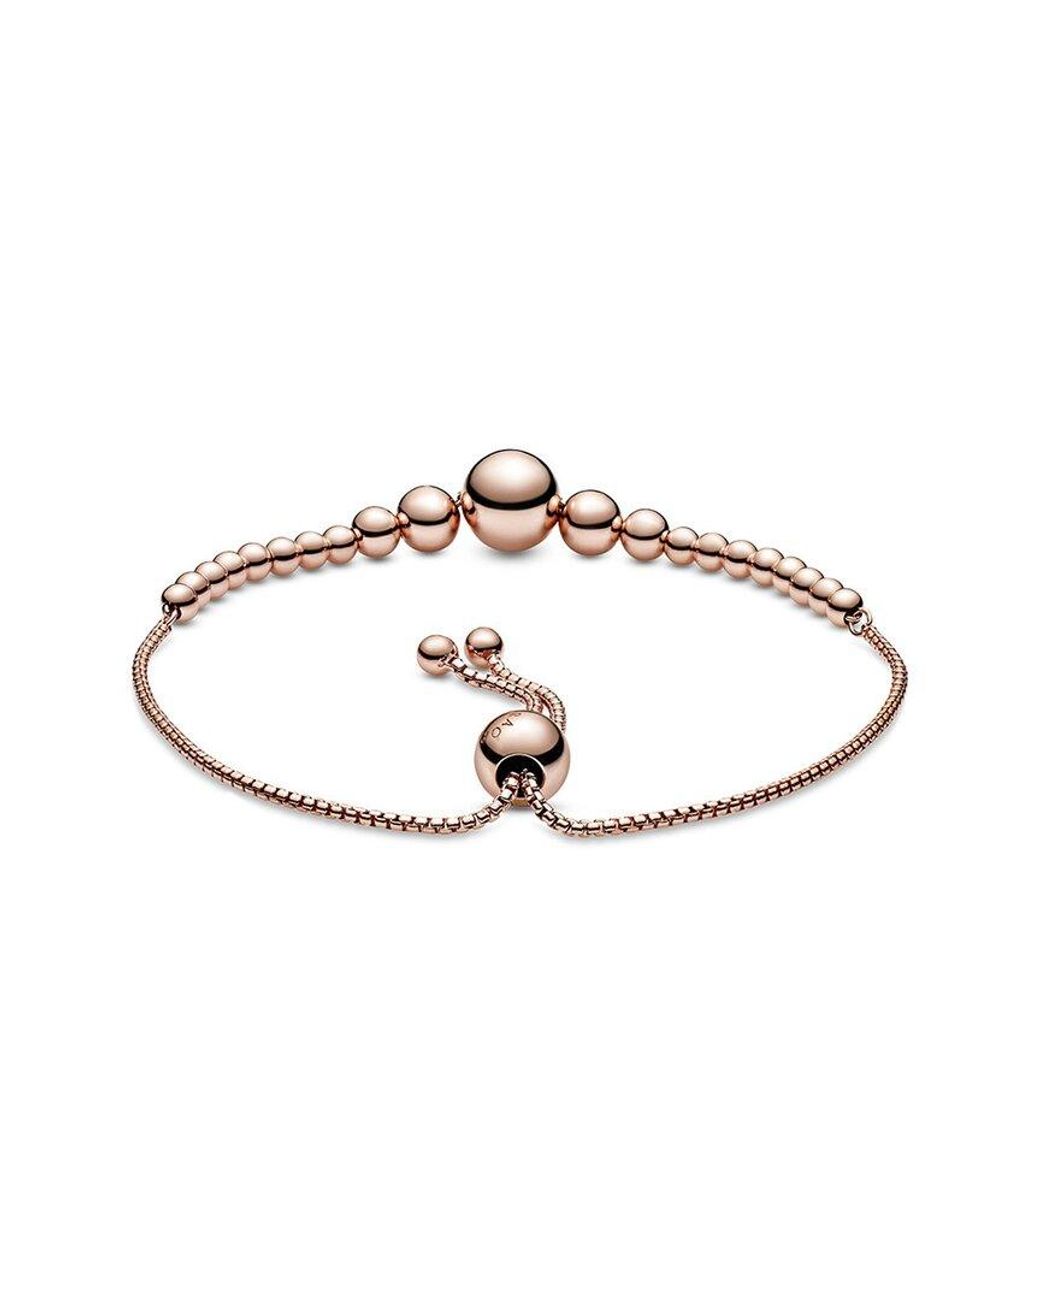 Amazon.com: Savlano 925 Sterling Silver 14K Gold Plated Italian Solid  Adjustable Bolo Bead Ball Slider Bracelet Comes With Gift Box for Women -  Made in Italy (White): Clothing, Shoes & Jewelry